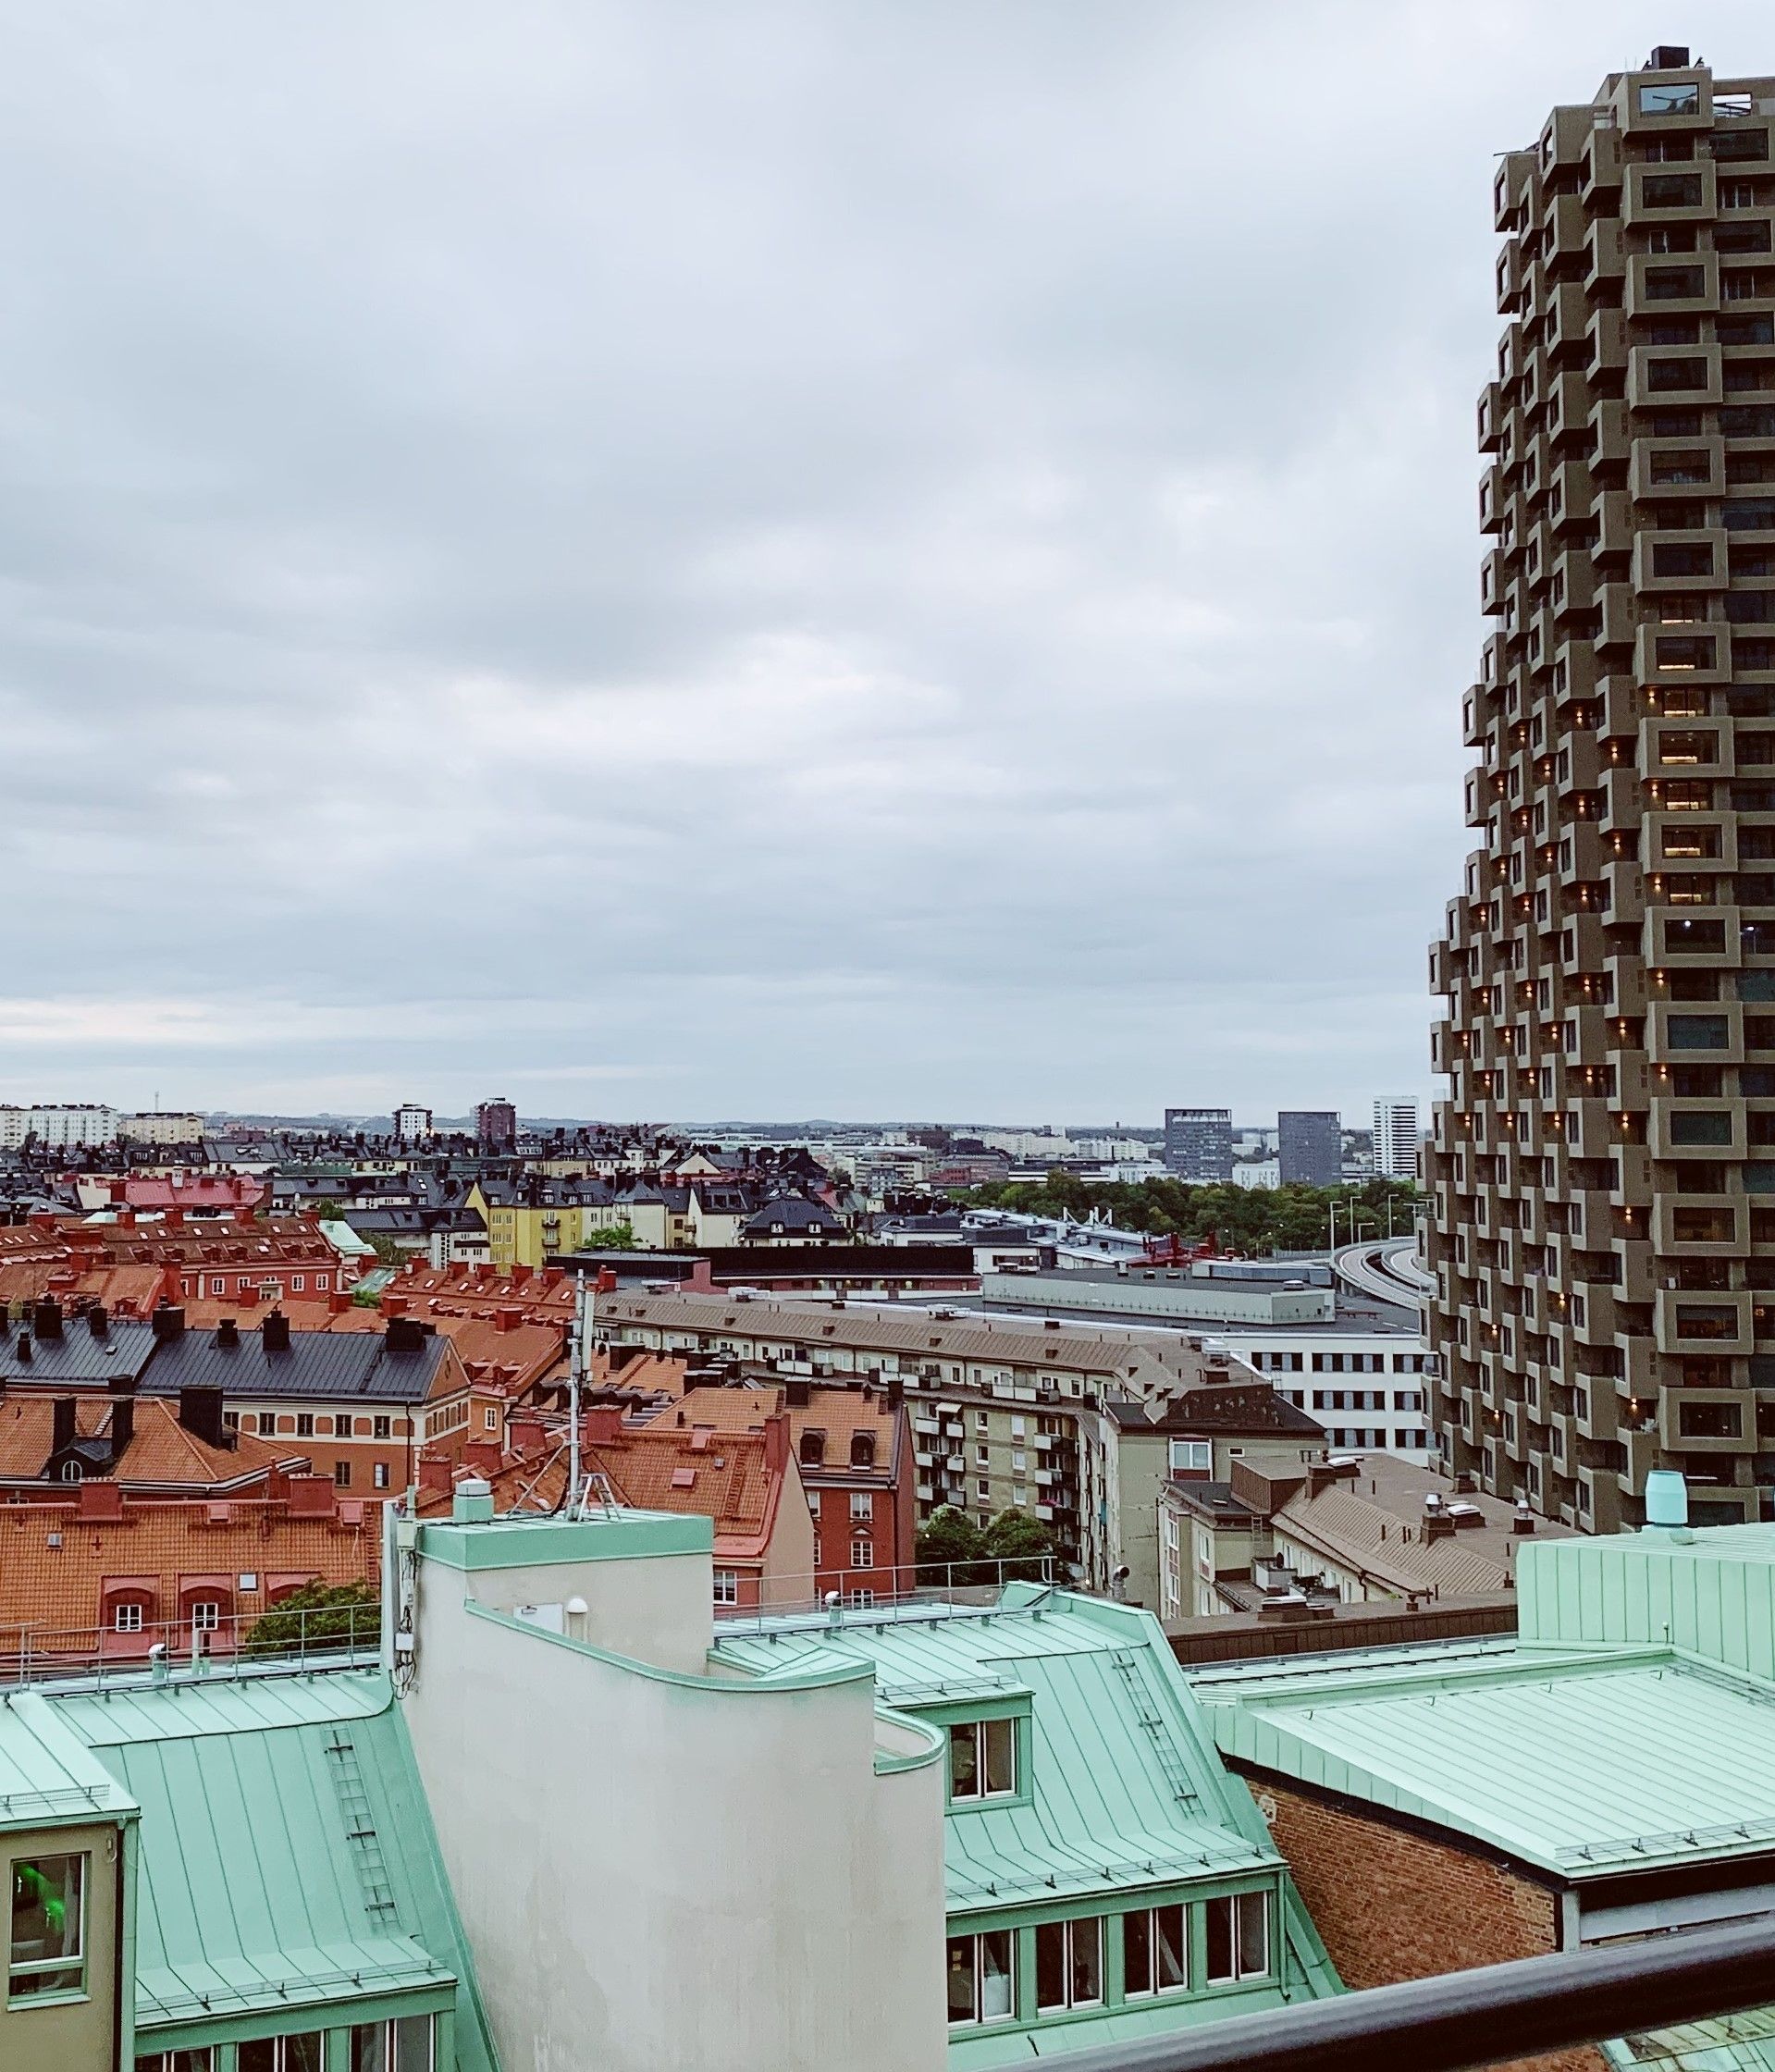 A view of the Stockholm skyline with its lovely fooftops on a cloudy day.